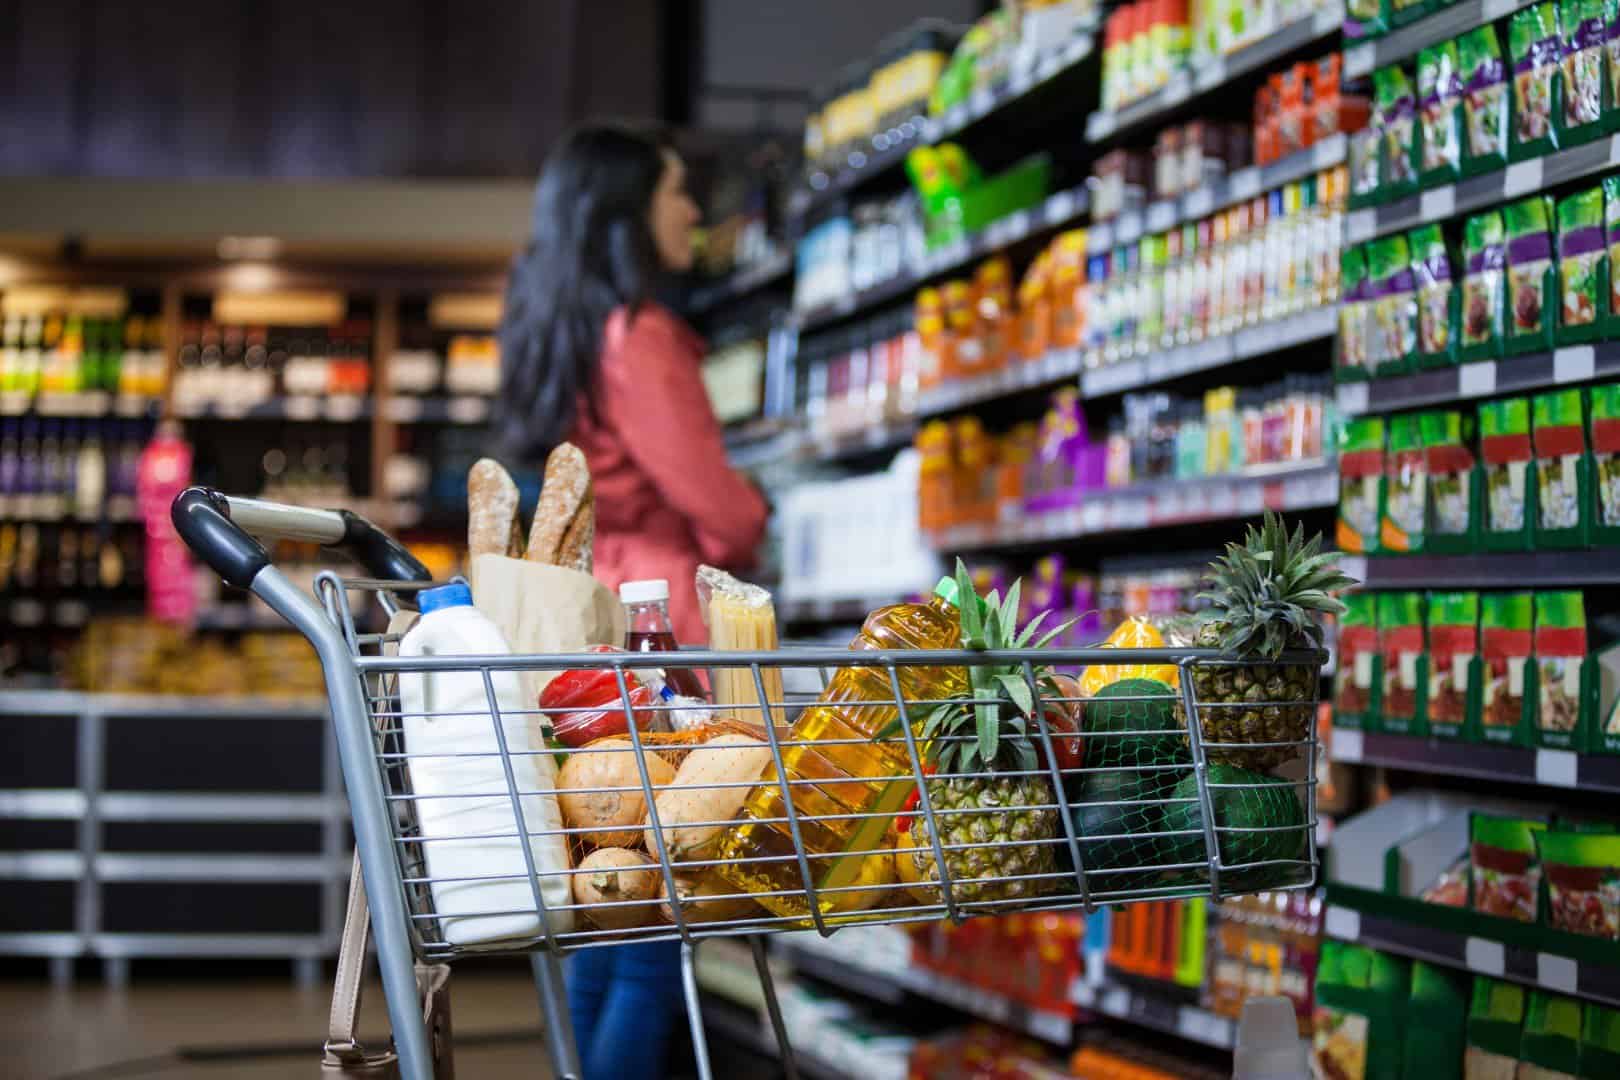 How to Grocery Shop for One - Grocery Shopping for One Person